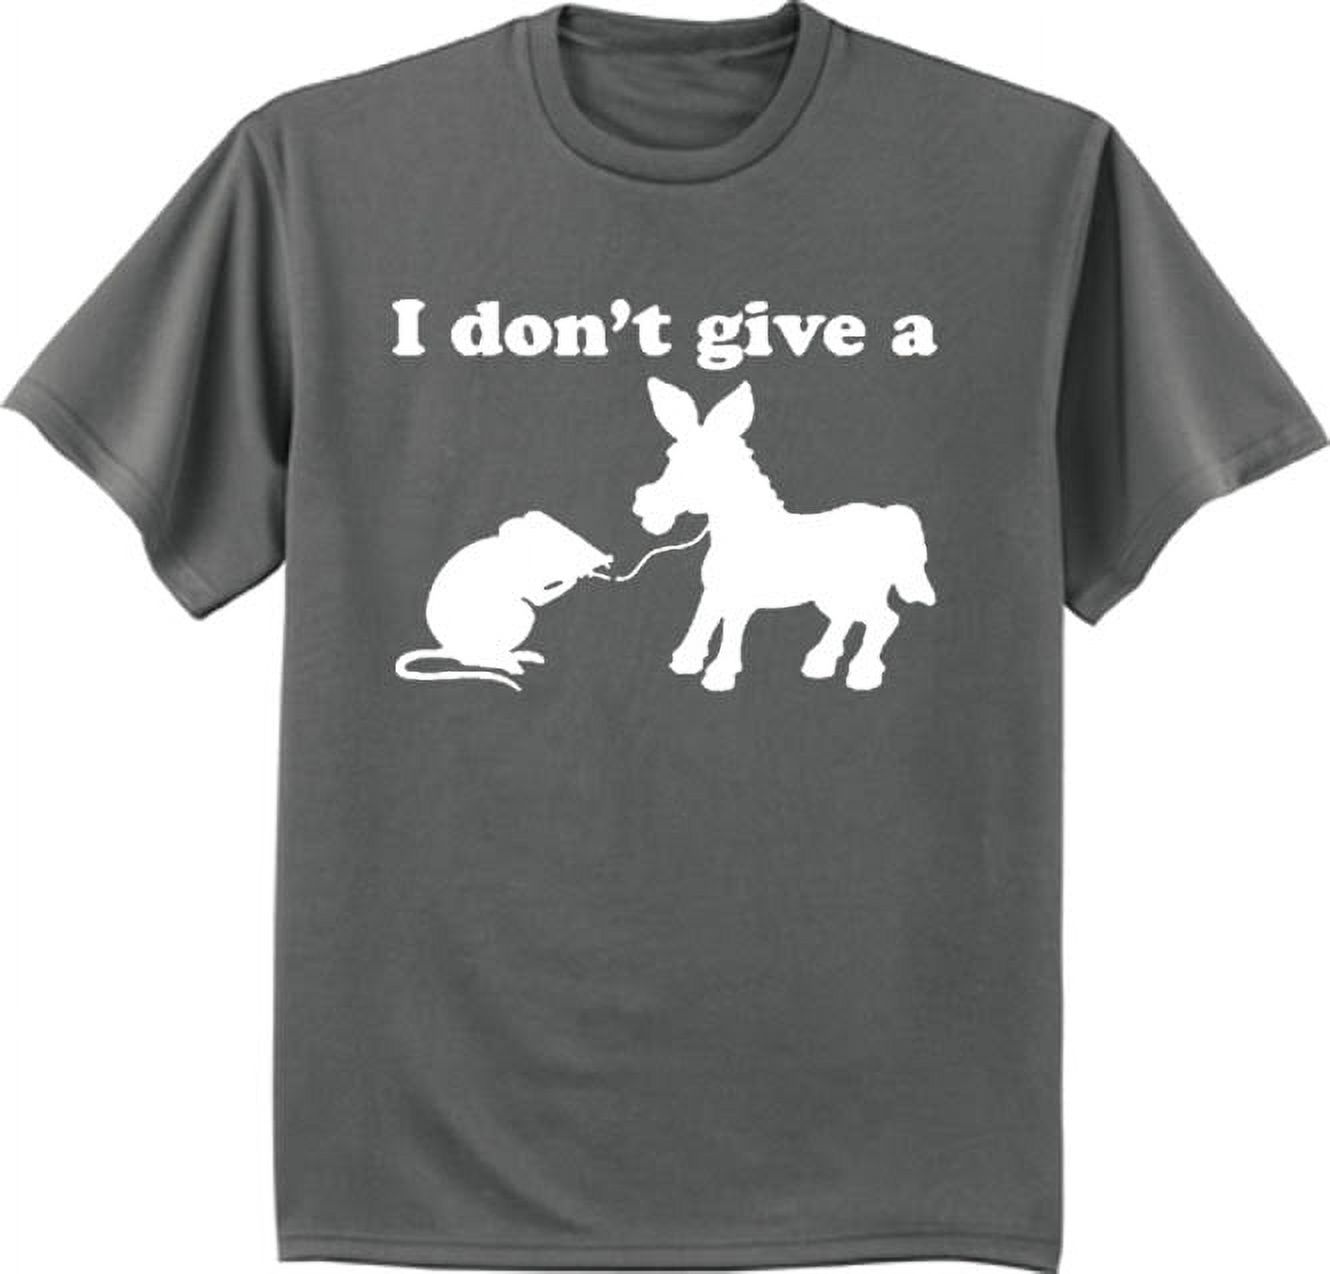 Donkey rat funny saying decal t-shirt graphic tee for men - image 1 of 1